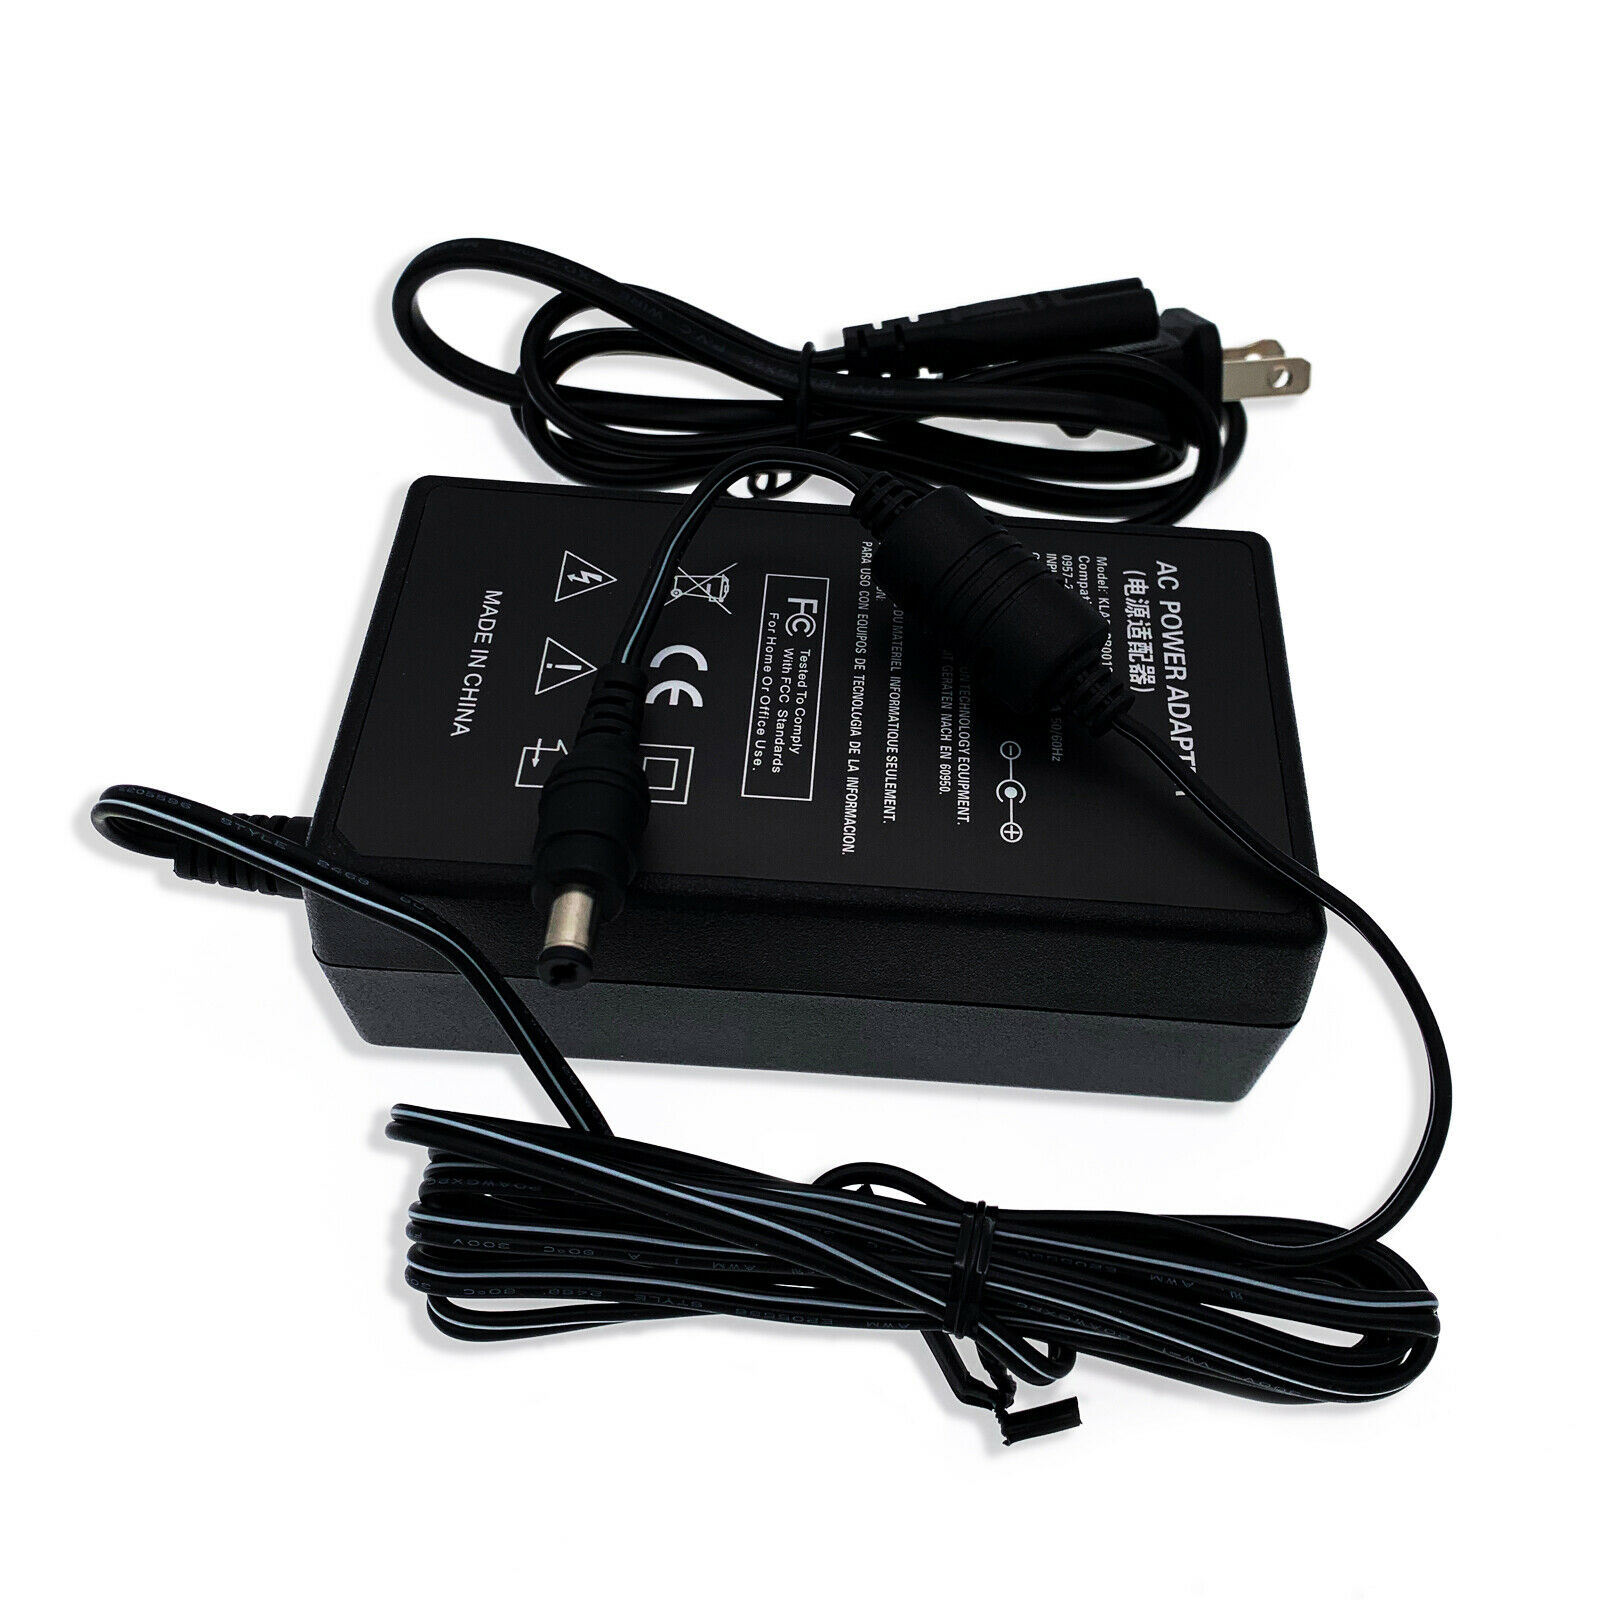 AC Adapter For HP Photosmart A612 A616 A617 A618 A626 A636 Printer Power Supply A - Click Image to Close